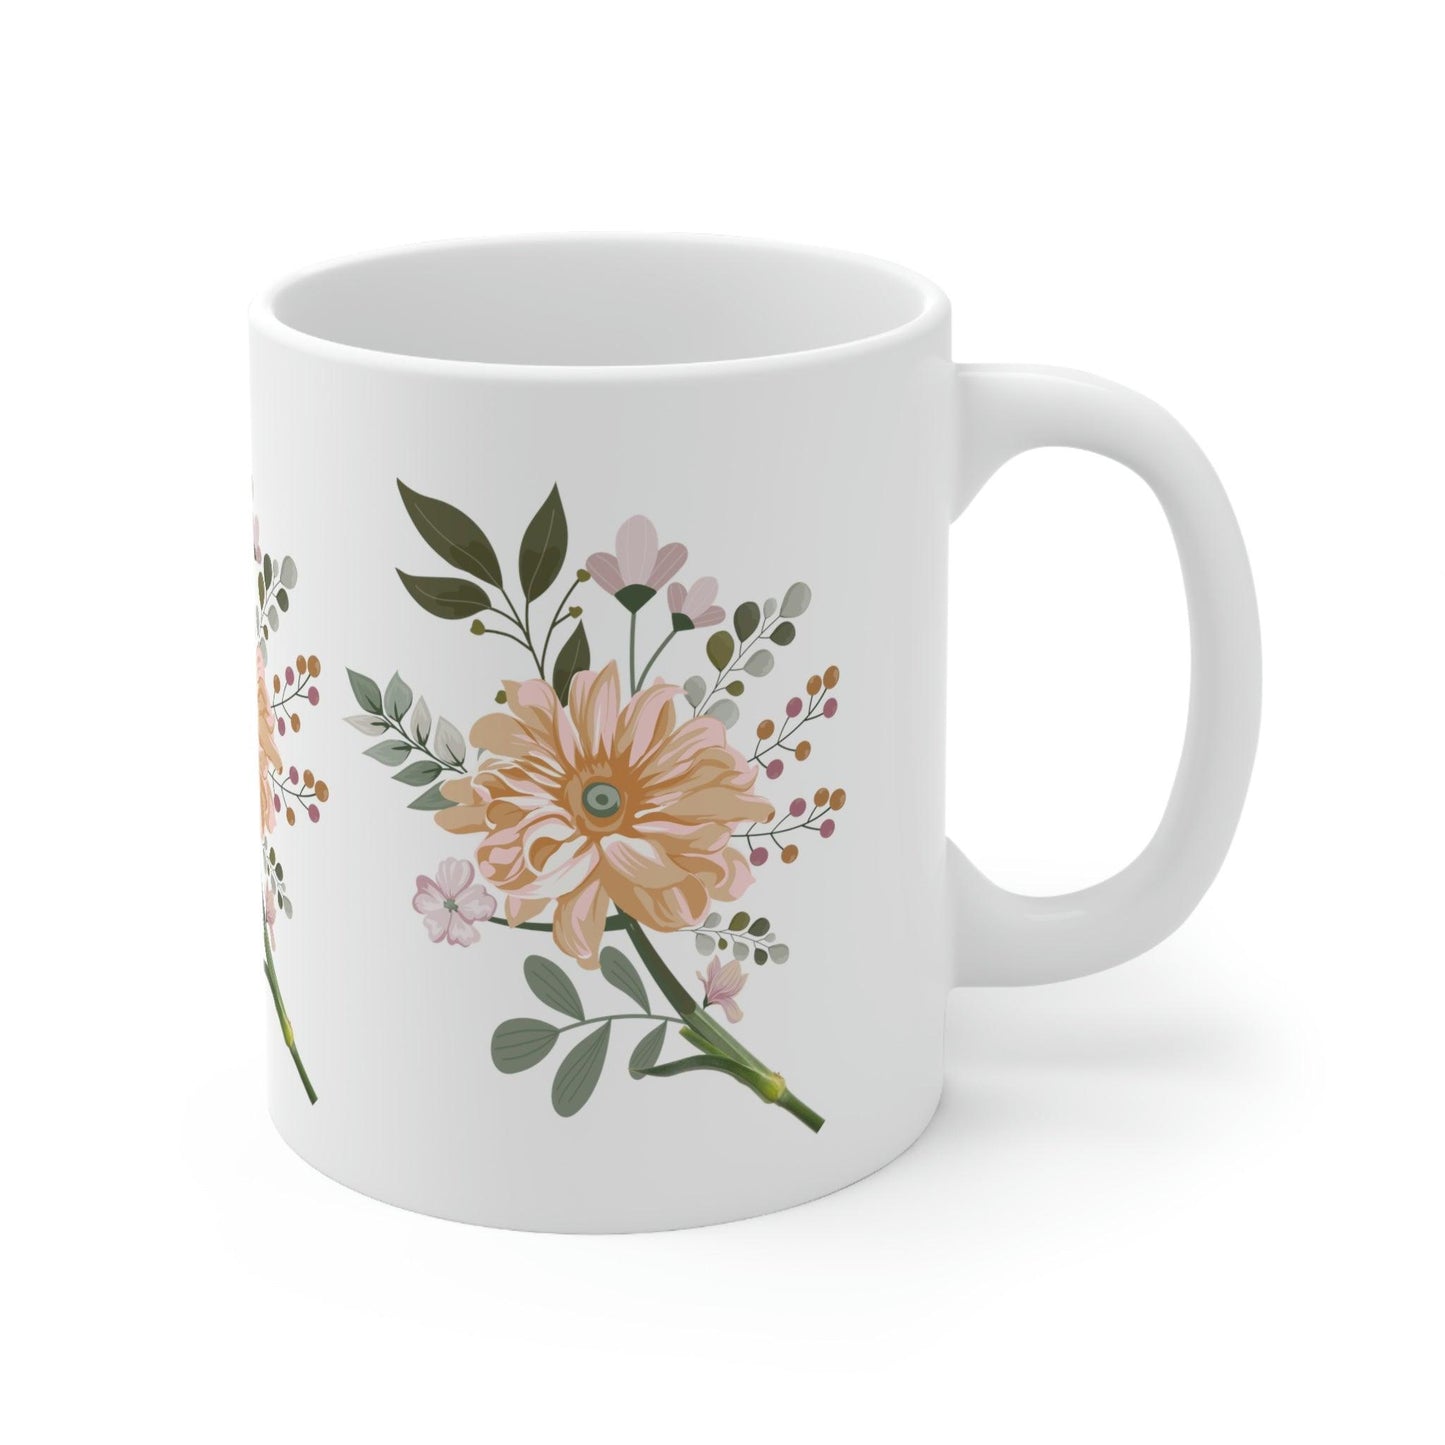 Floral Mug, gift for mom on mothers day, Birthday gift for mom, gift for plant lovers, coffee mug for her, hot cocoa mug, gift for coffee lover - Giftsmojo